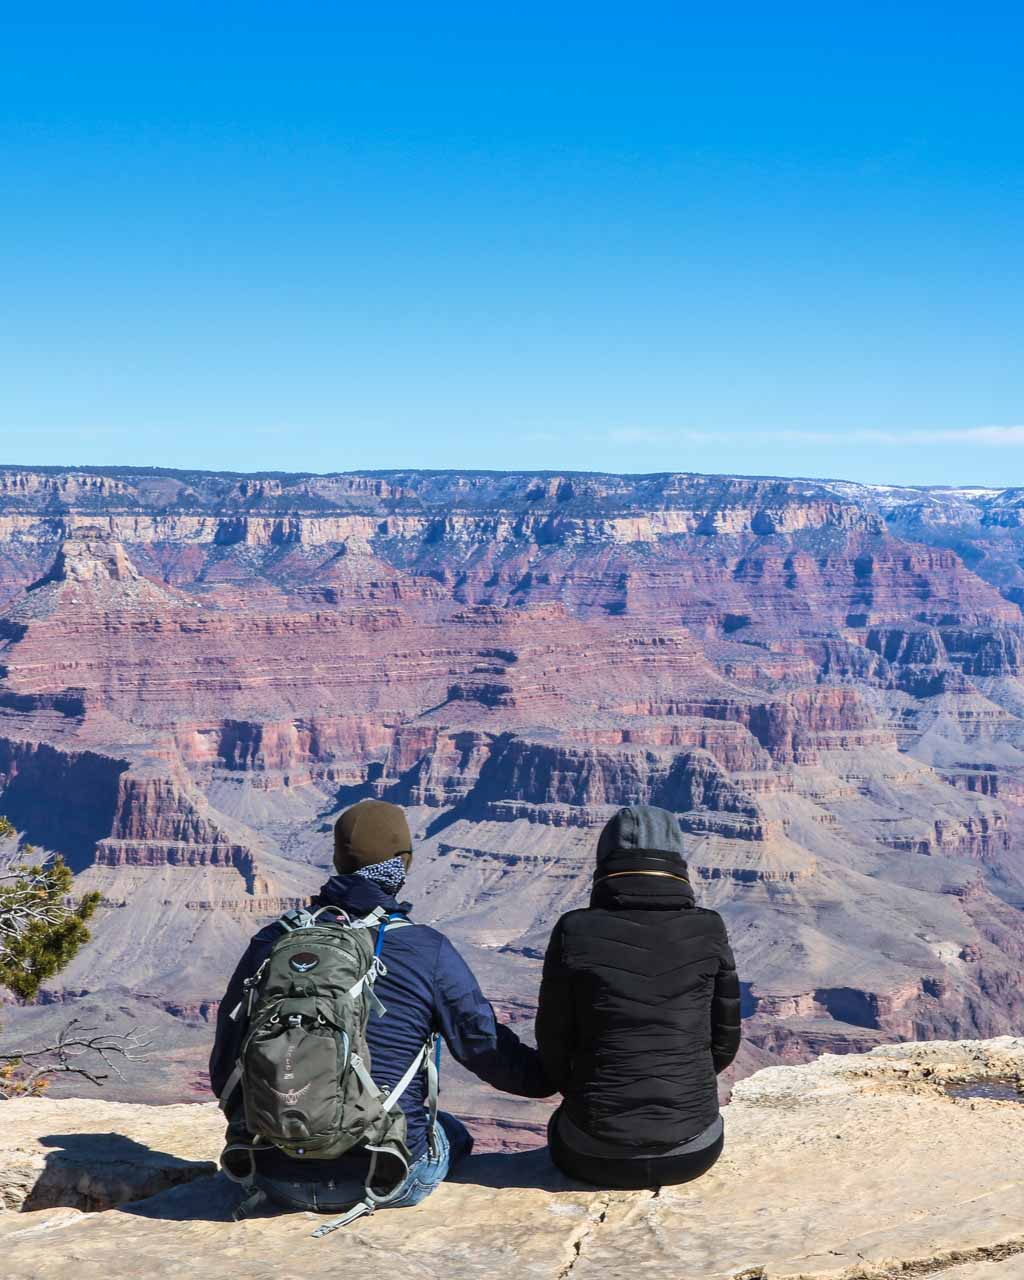 Couple enjoying the view, Grand Canyon National Park